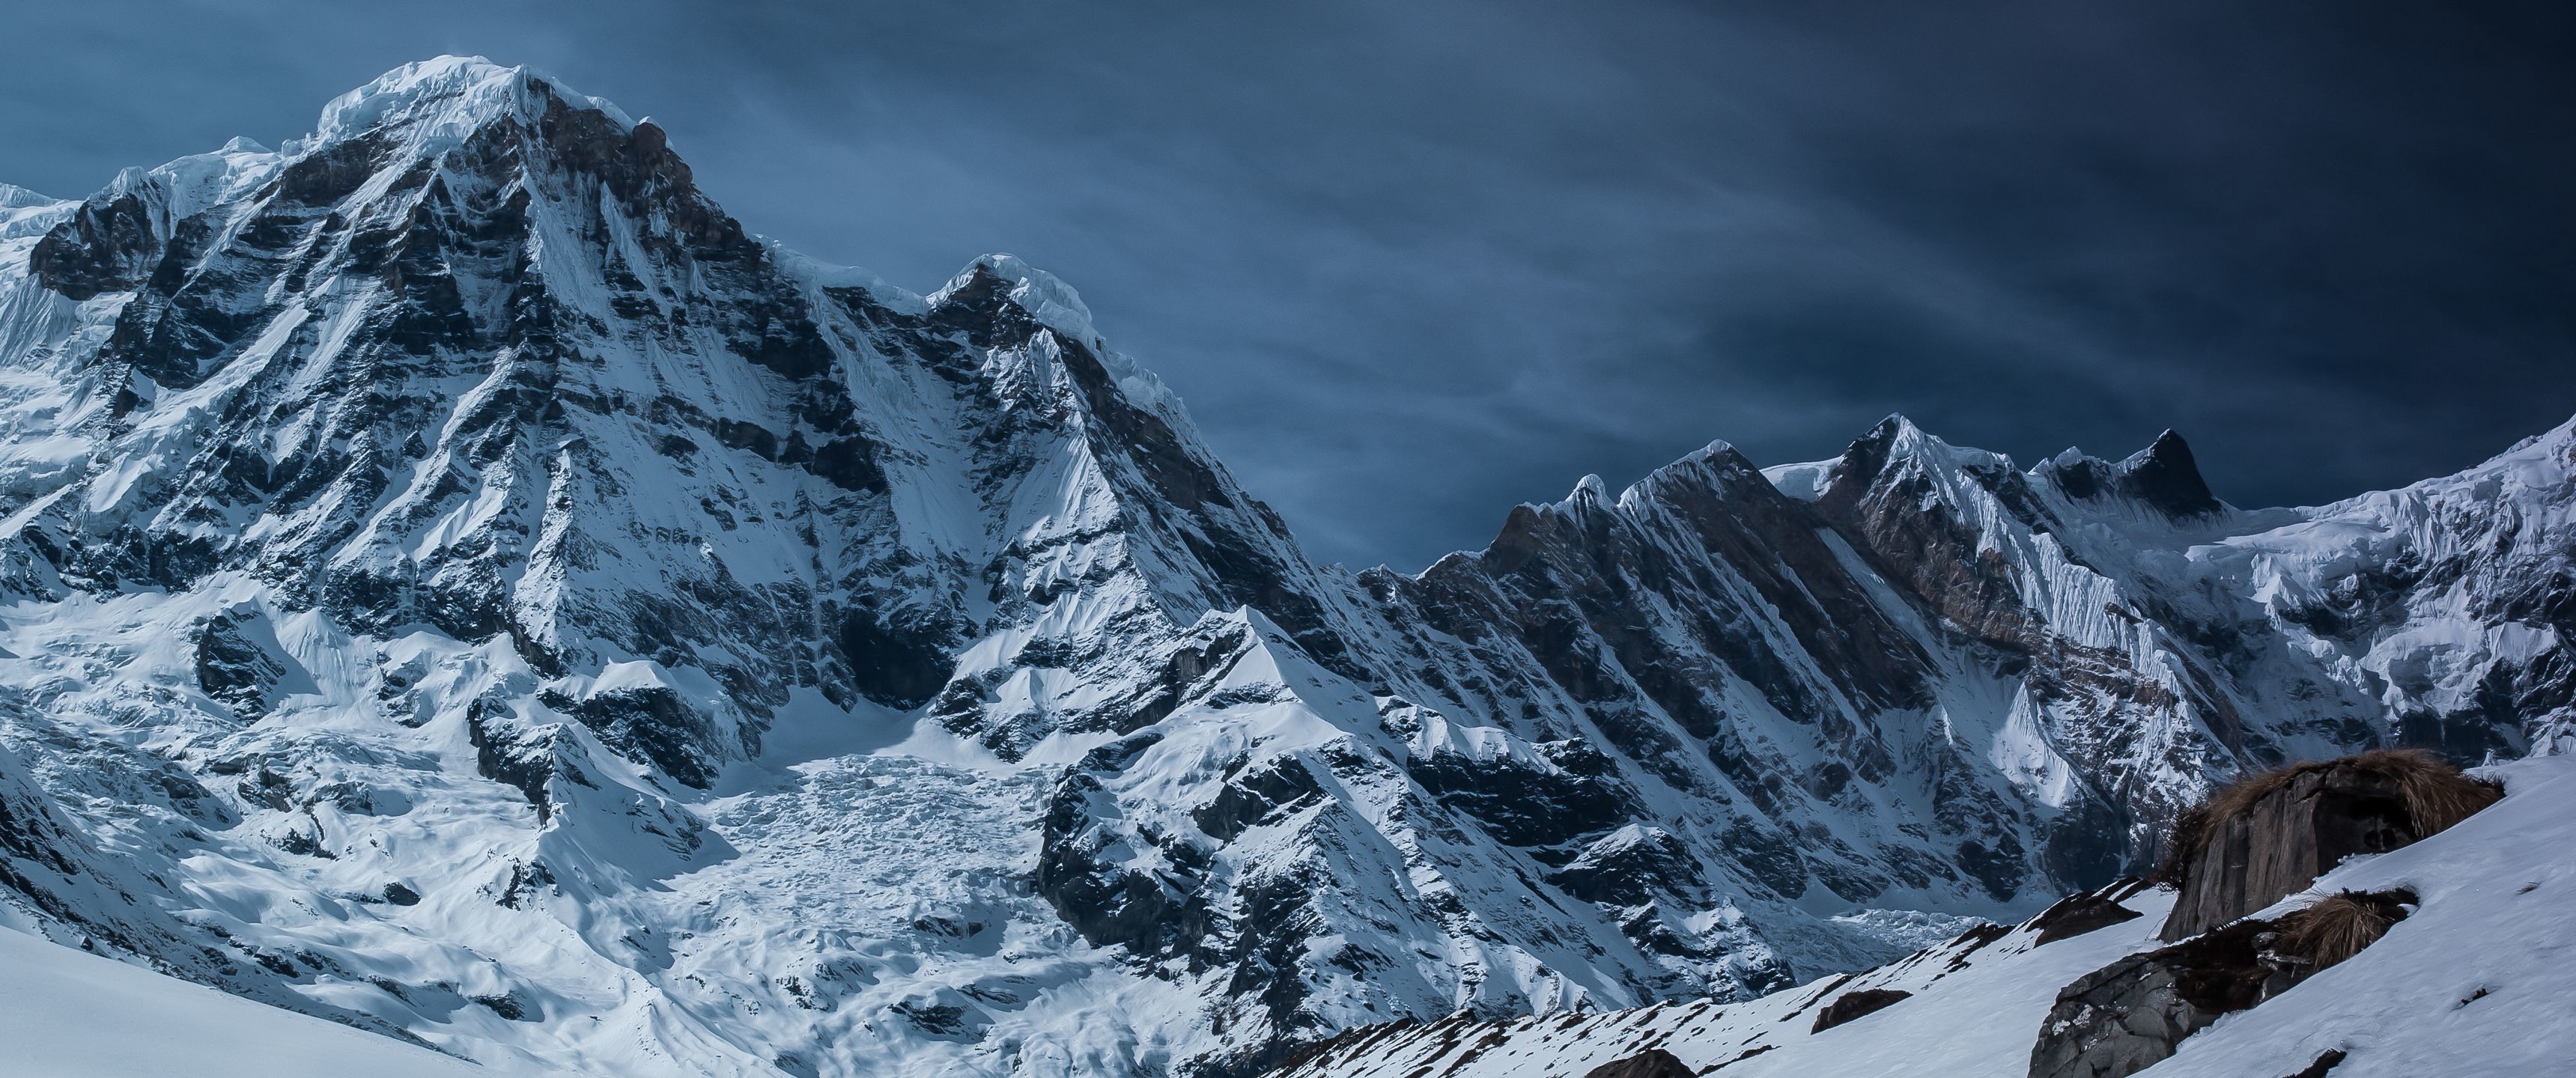 3440x1440 Snow Covered Mountains - 21:9 Ultrawide HD Wallpaper ()